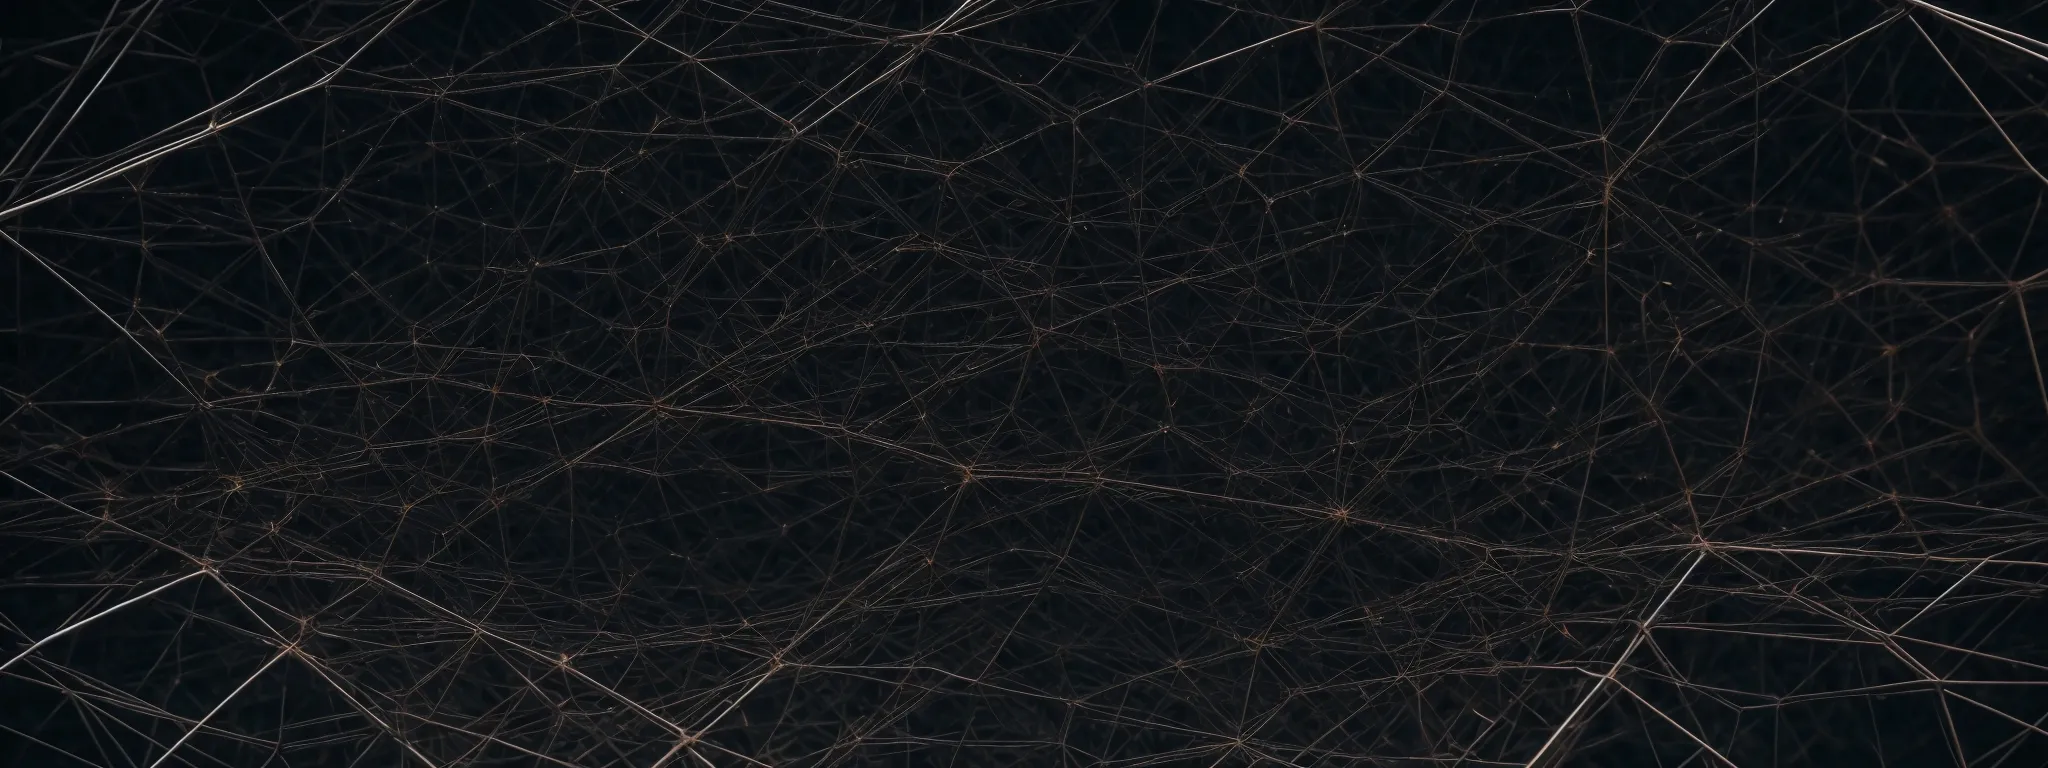 a wide, intricate web encircling various interconnected nodes, symbolizing a robust network.